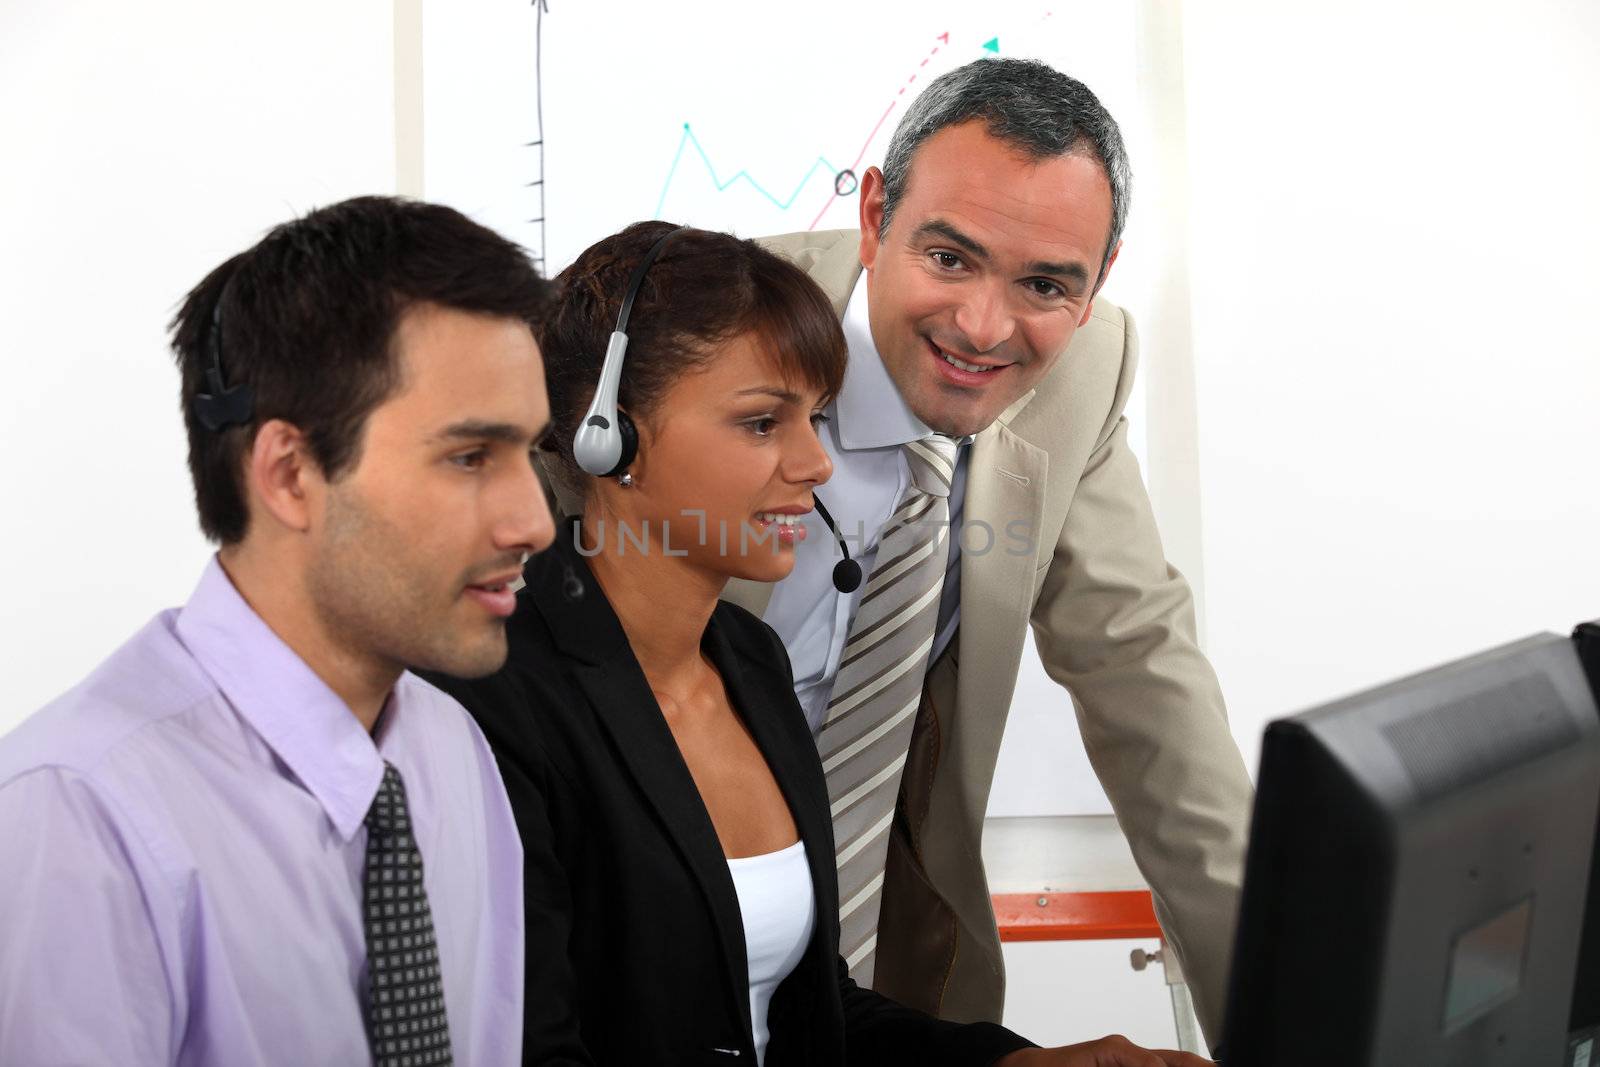 Call-center worker being trained